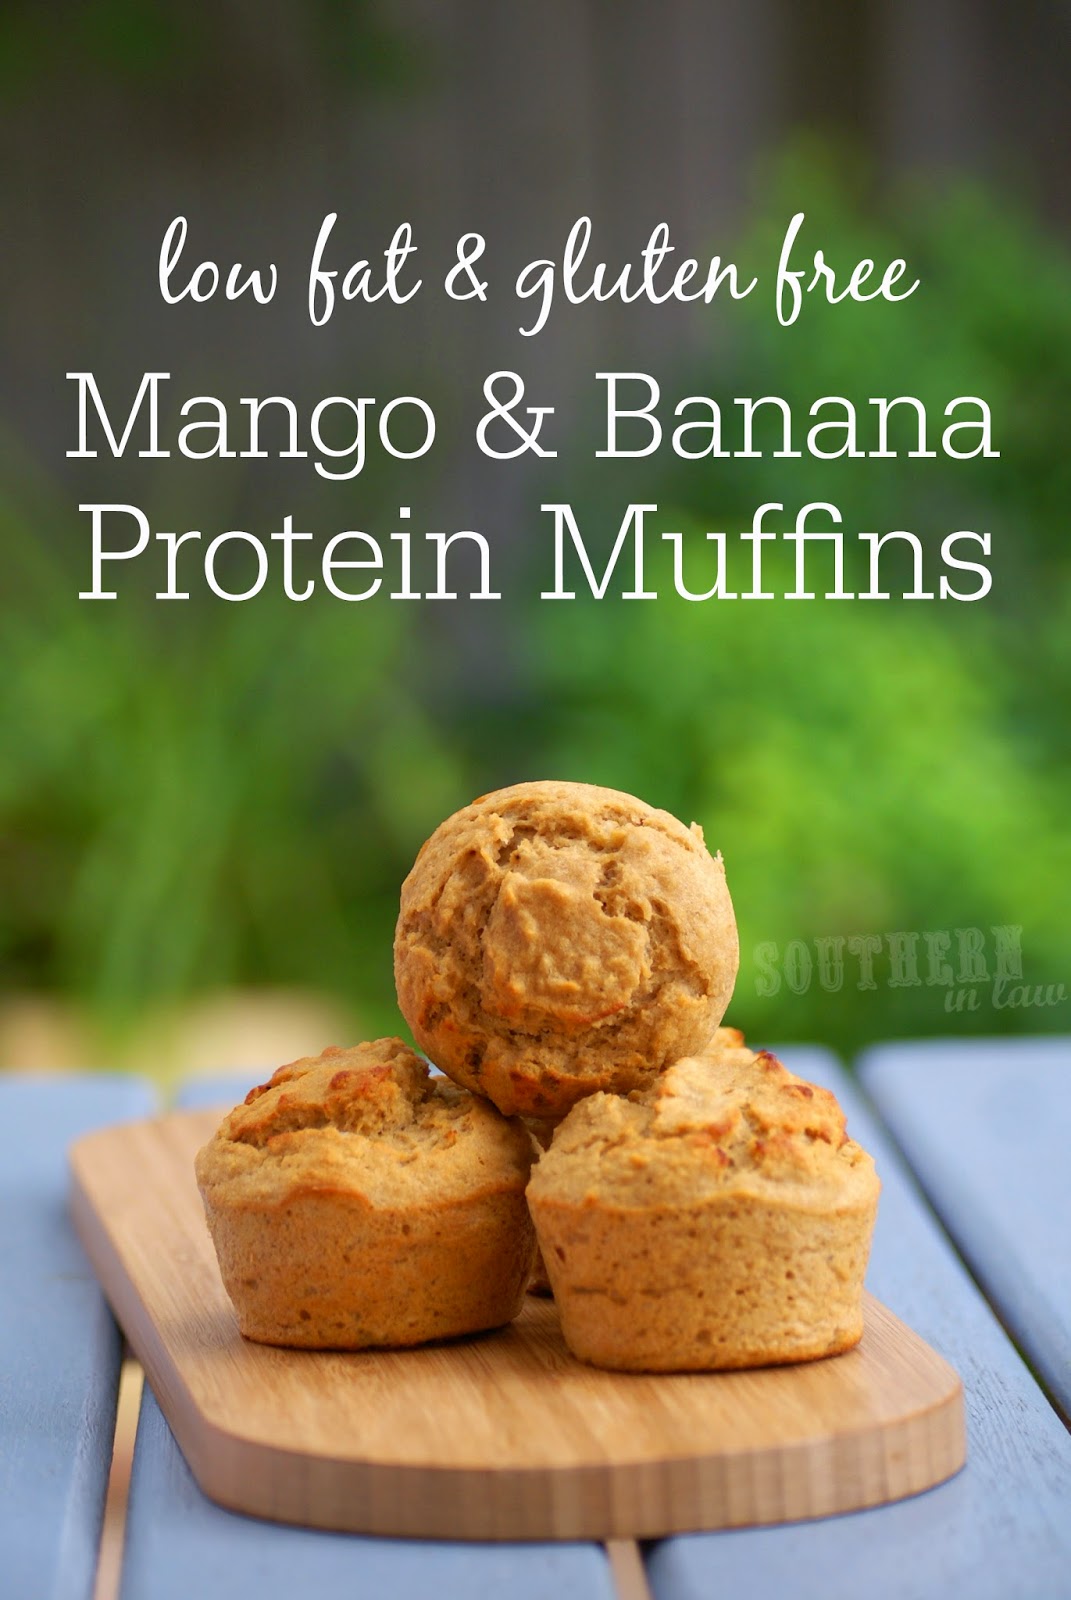 Healthy Mango Banana Protein Muffins - low fat, gluten free, high protein, low calorie, sugar free, clean eating recipes